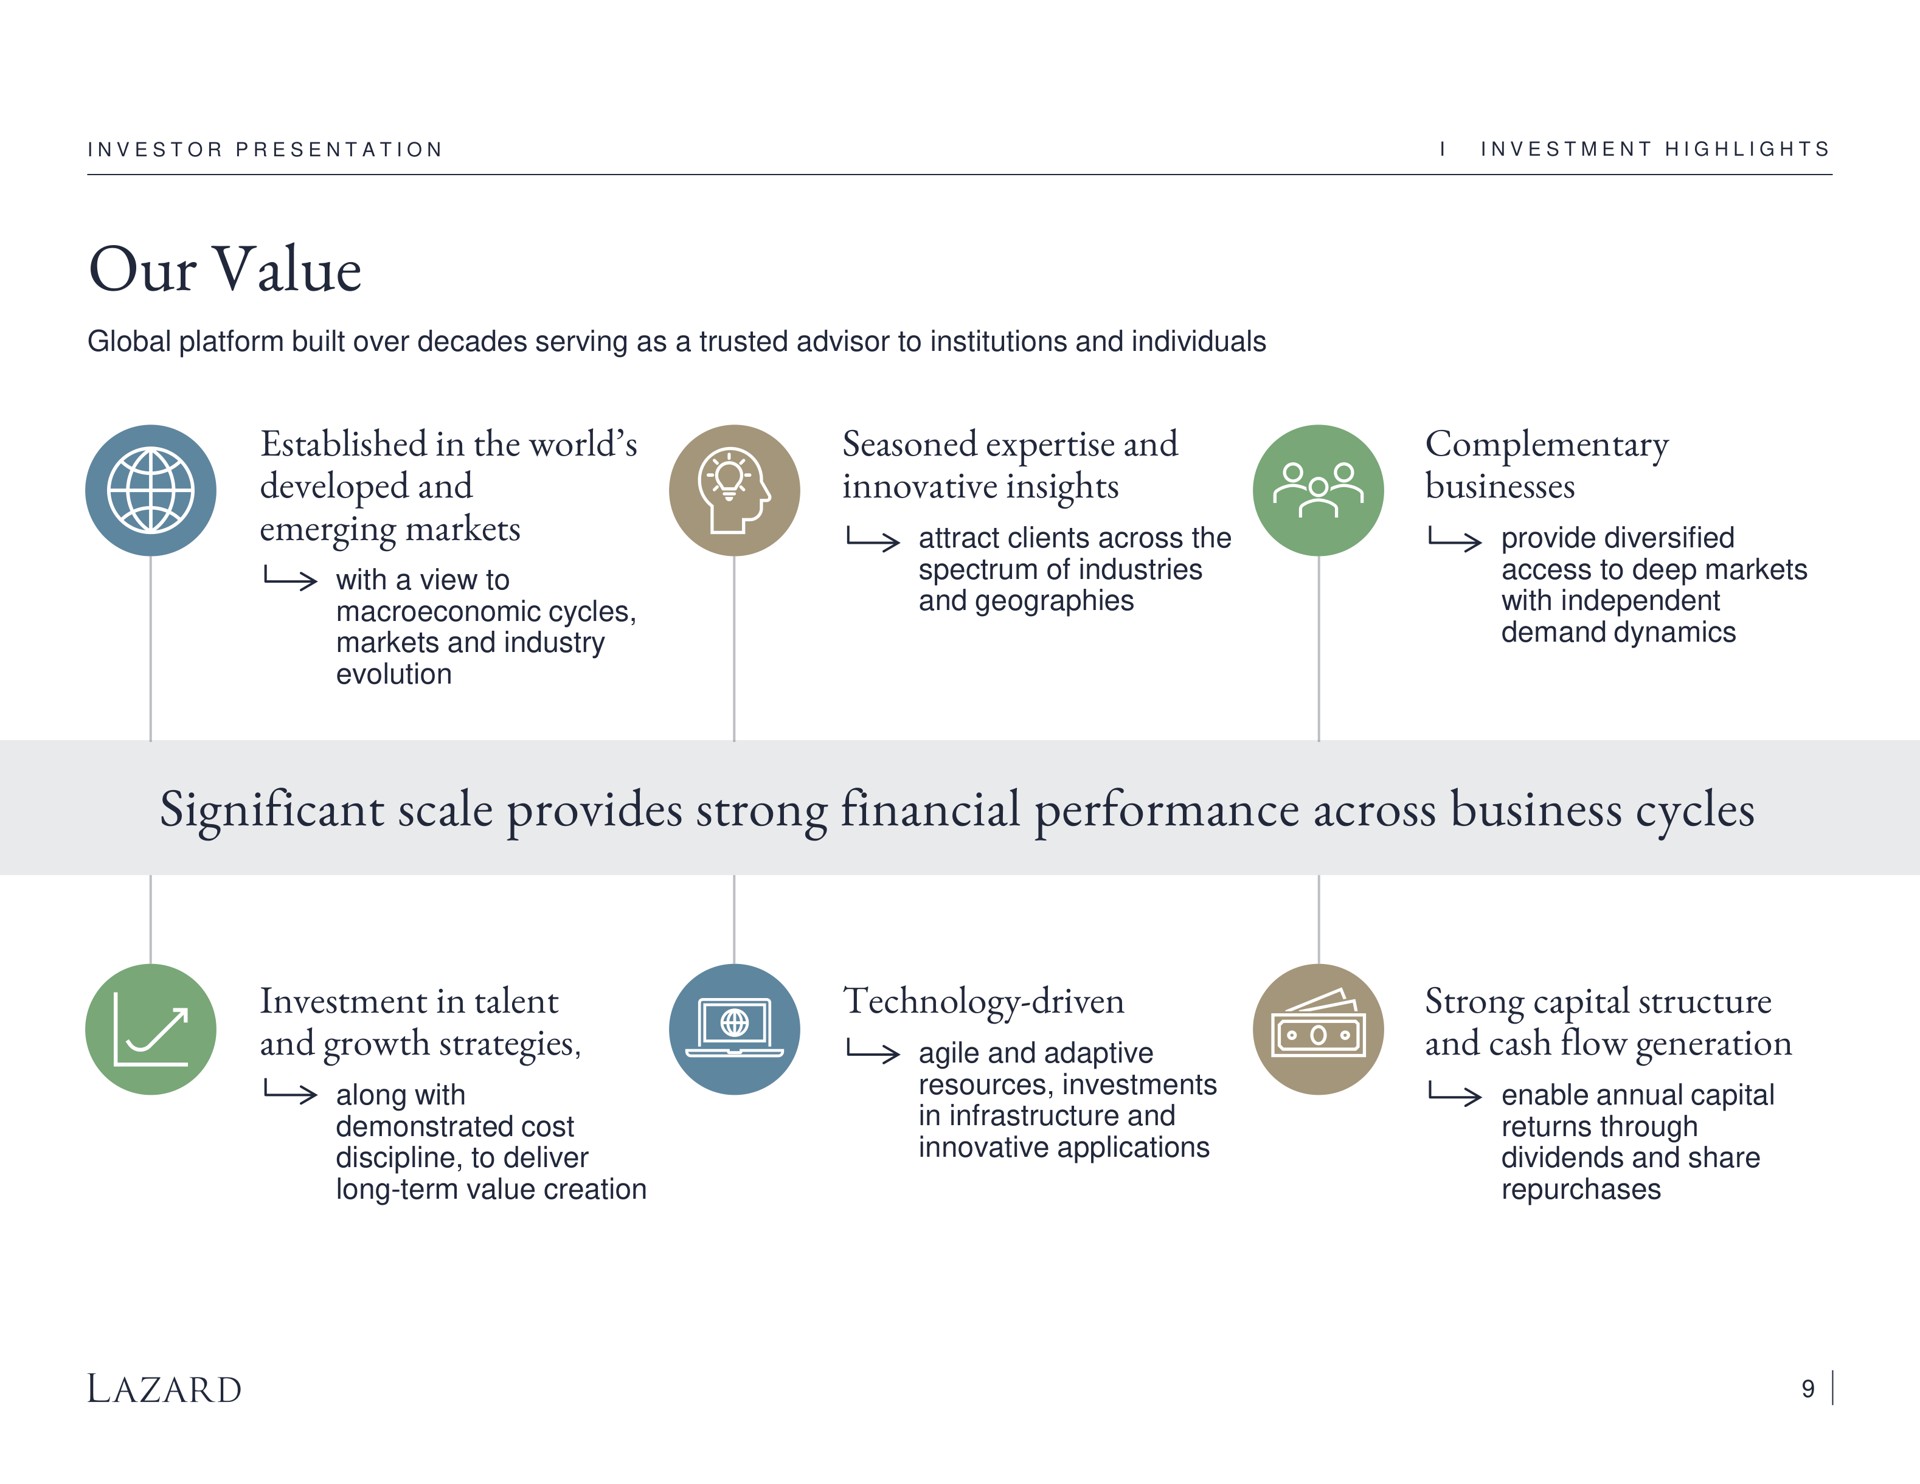 our value established in the world developed and emerging markets seasoned and innovative insights complementary businesses significant scale provides strong financial performance across business cycles investment in talent and growth strategies technology driven strong capital structure and cash flow generation industry attract clients lys provide diversified demand dynamics along with demonstrated cost discipline to deliver agile adaptive resources investments infrastructure applications enable annual returns through dividends share | Lazard